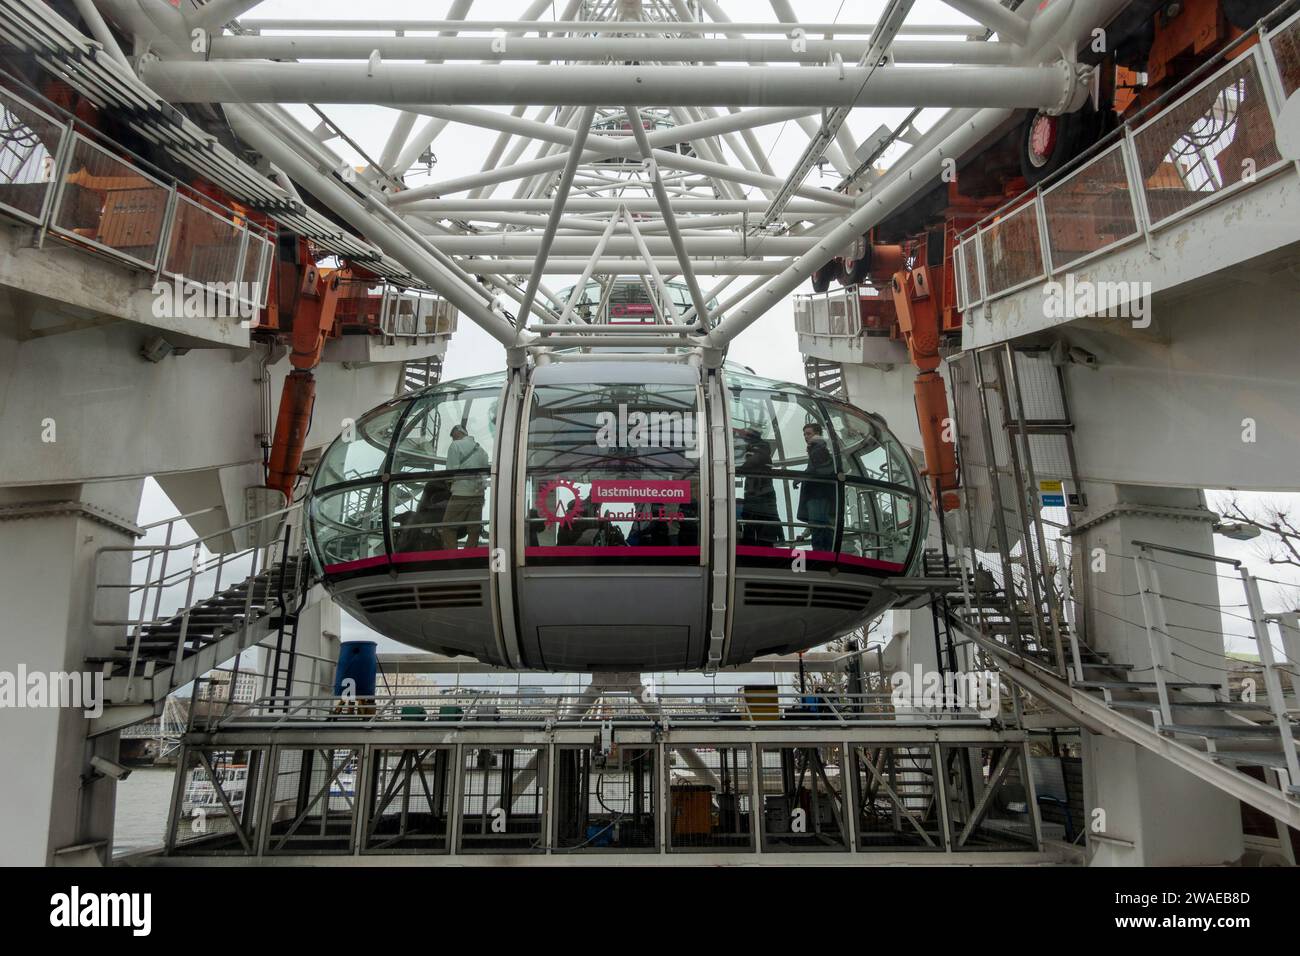 passengers in capsule, The London Eye, or the Millennium Wheel, Stock Photo